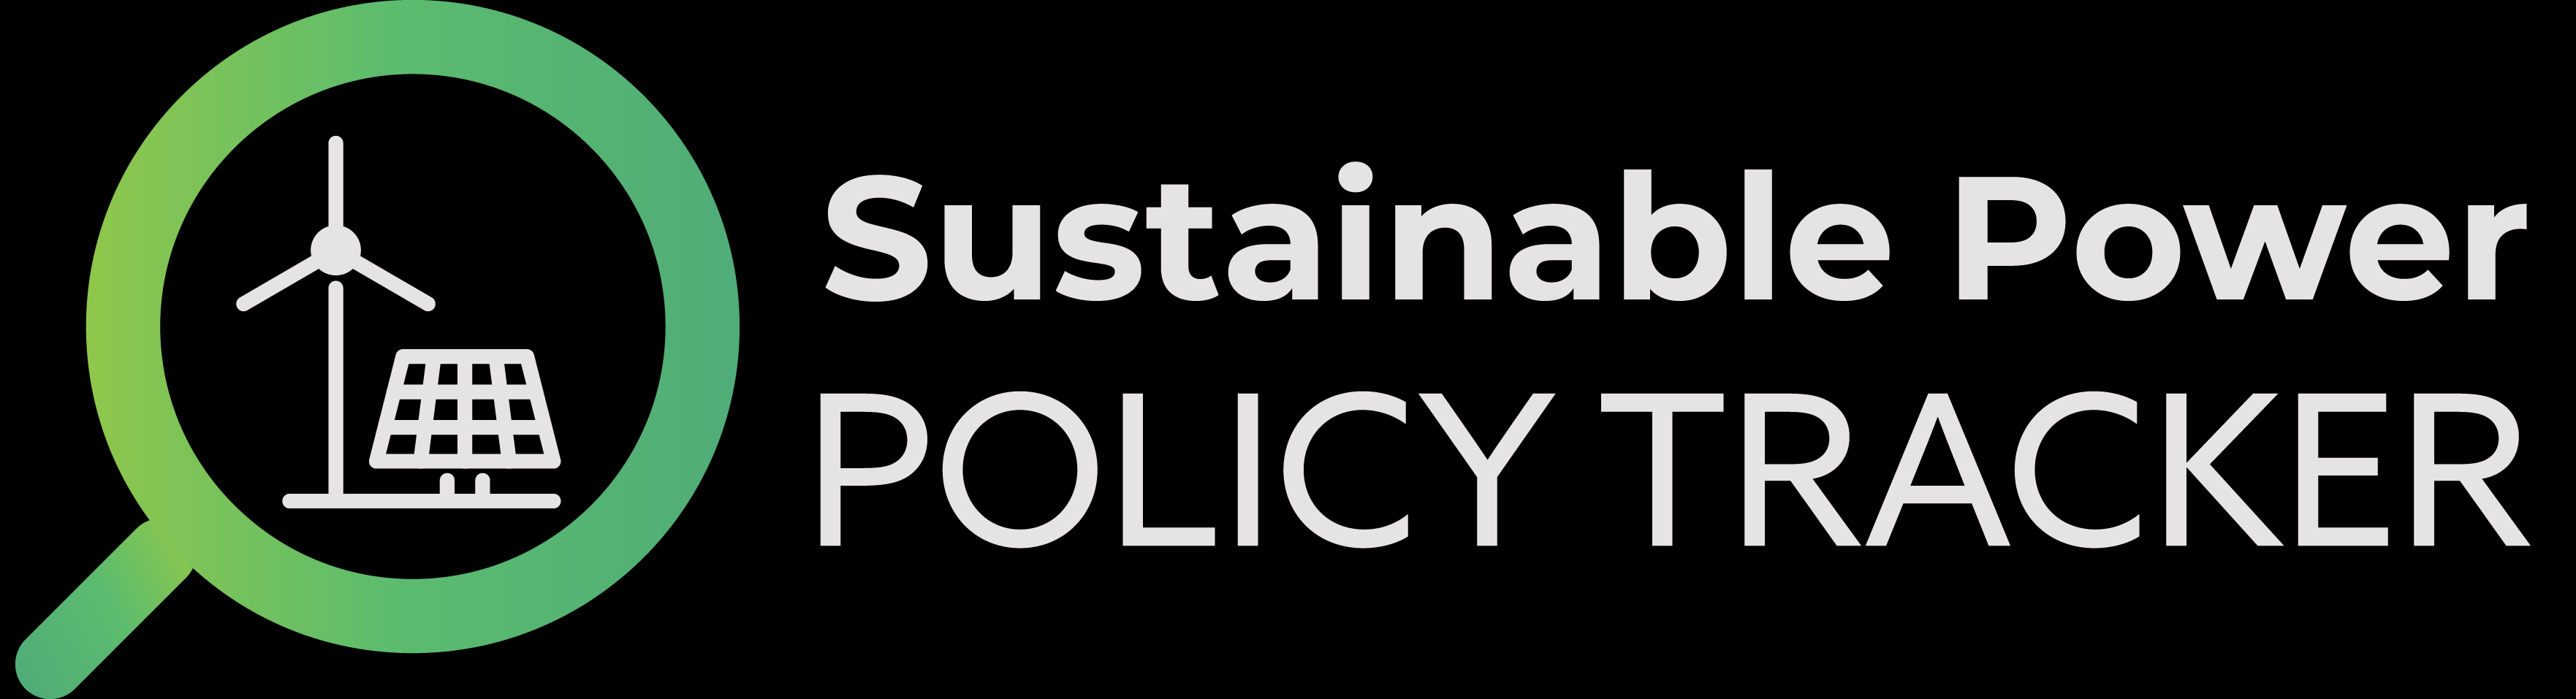 Sustainable Power Policy Tracker cover